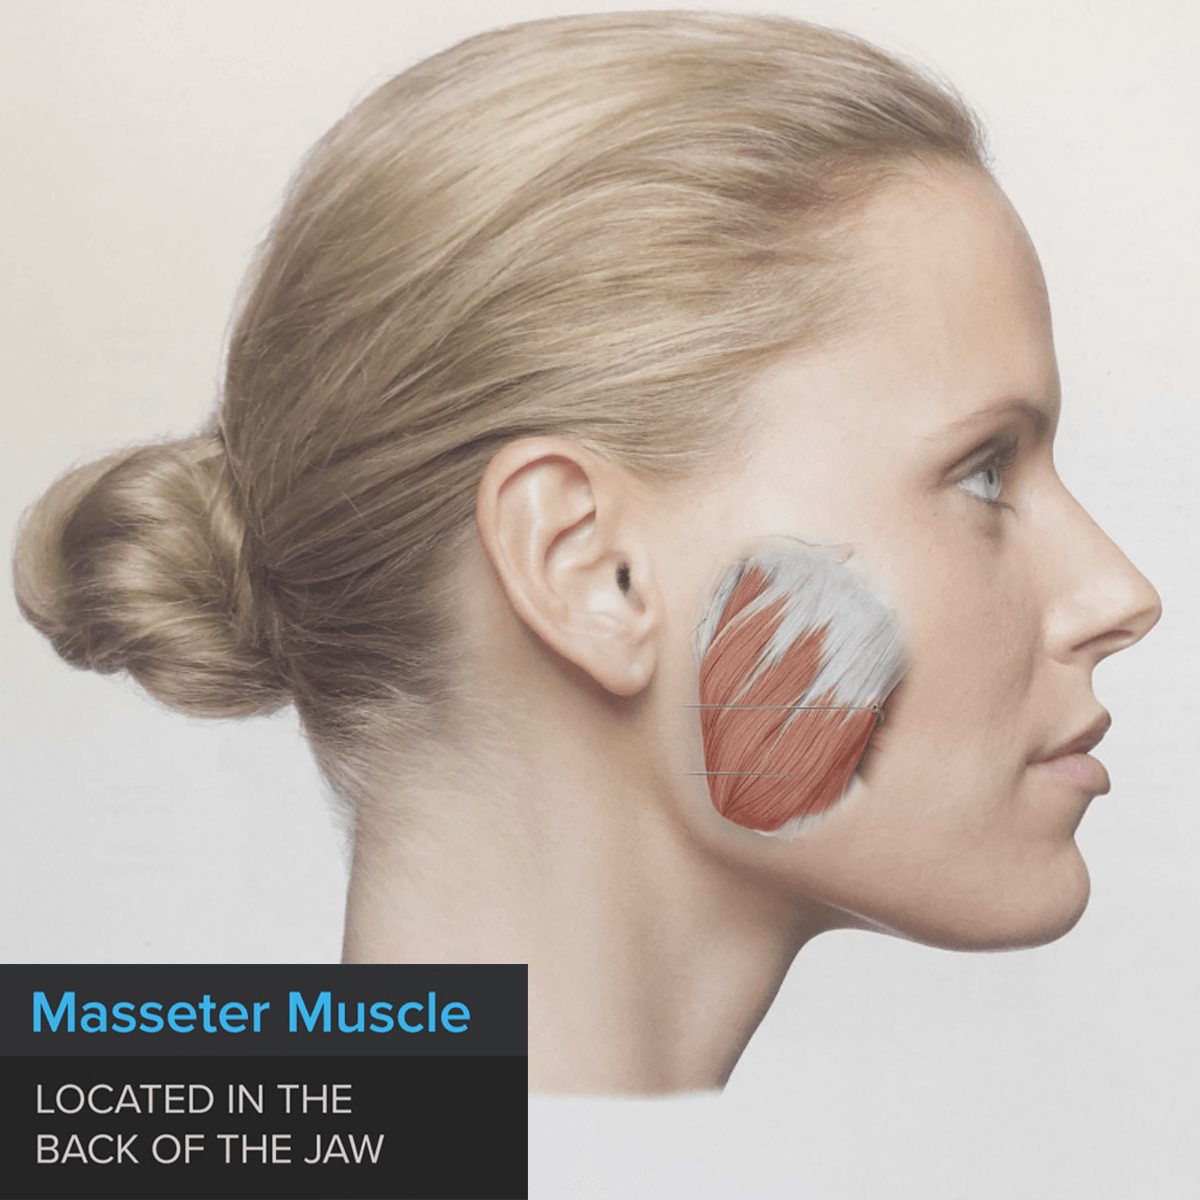 Masseter muscle located in the back of the jaw.